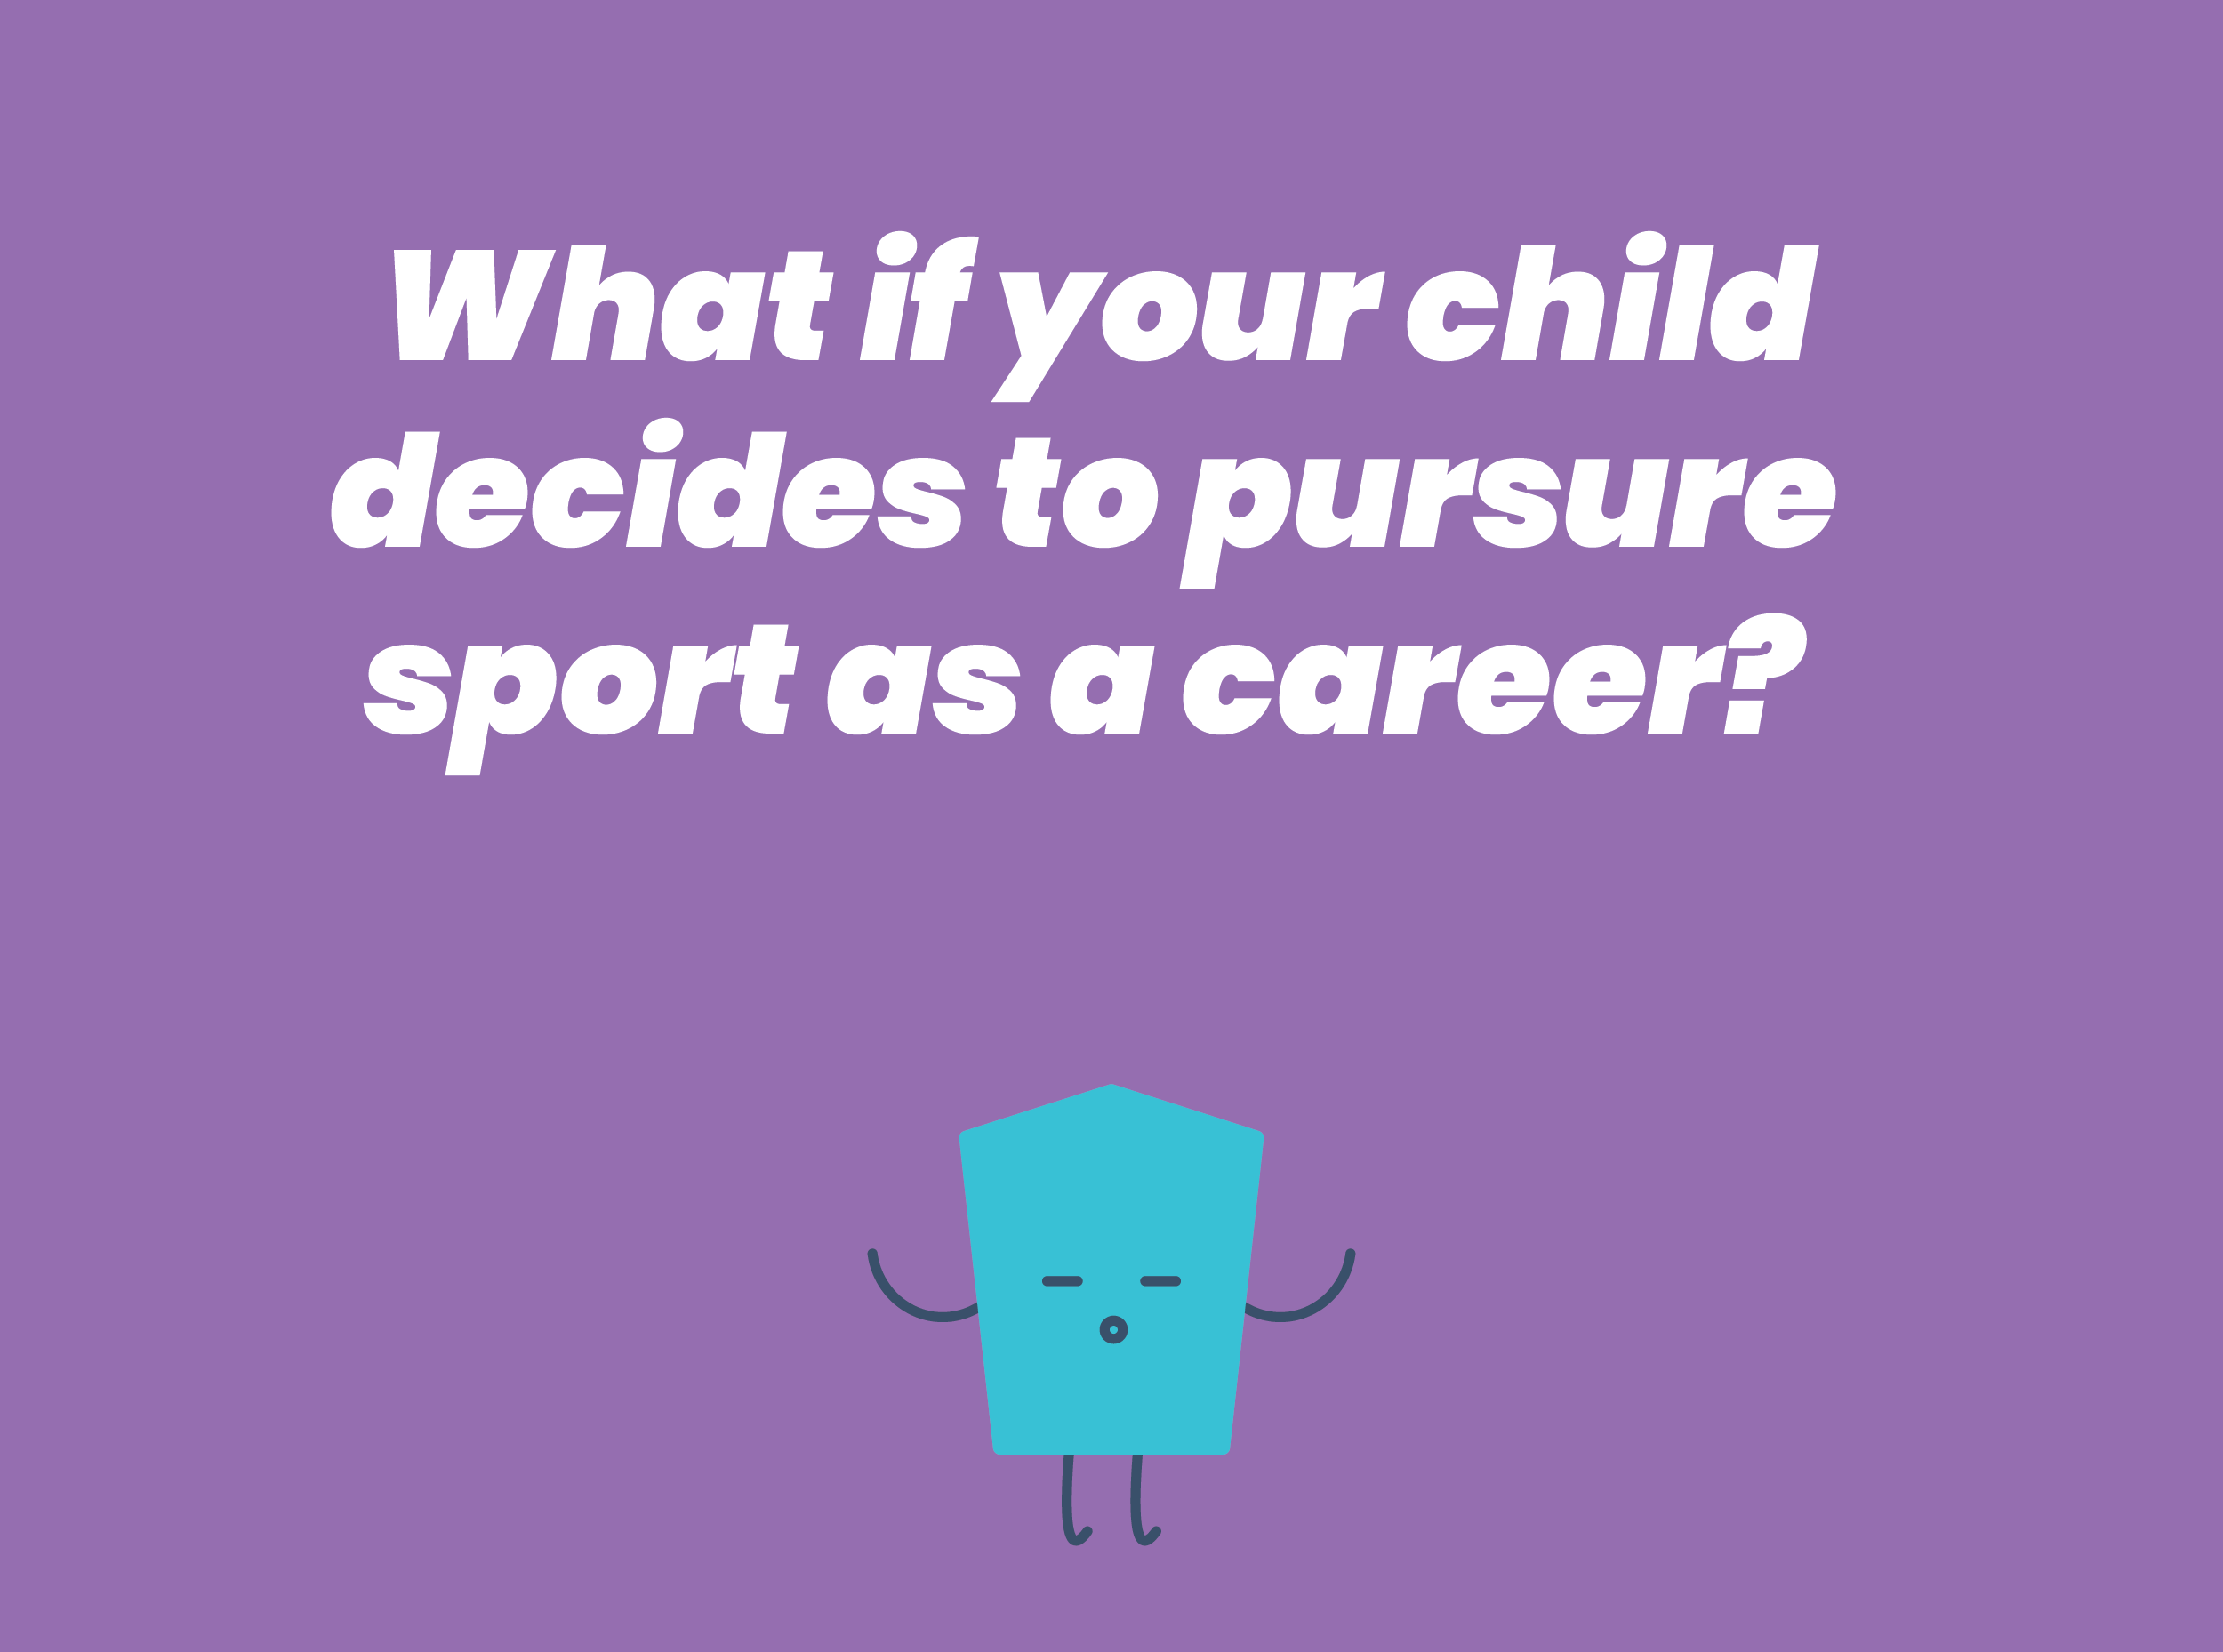 What if your child decides to pursure sport as a career?